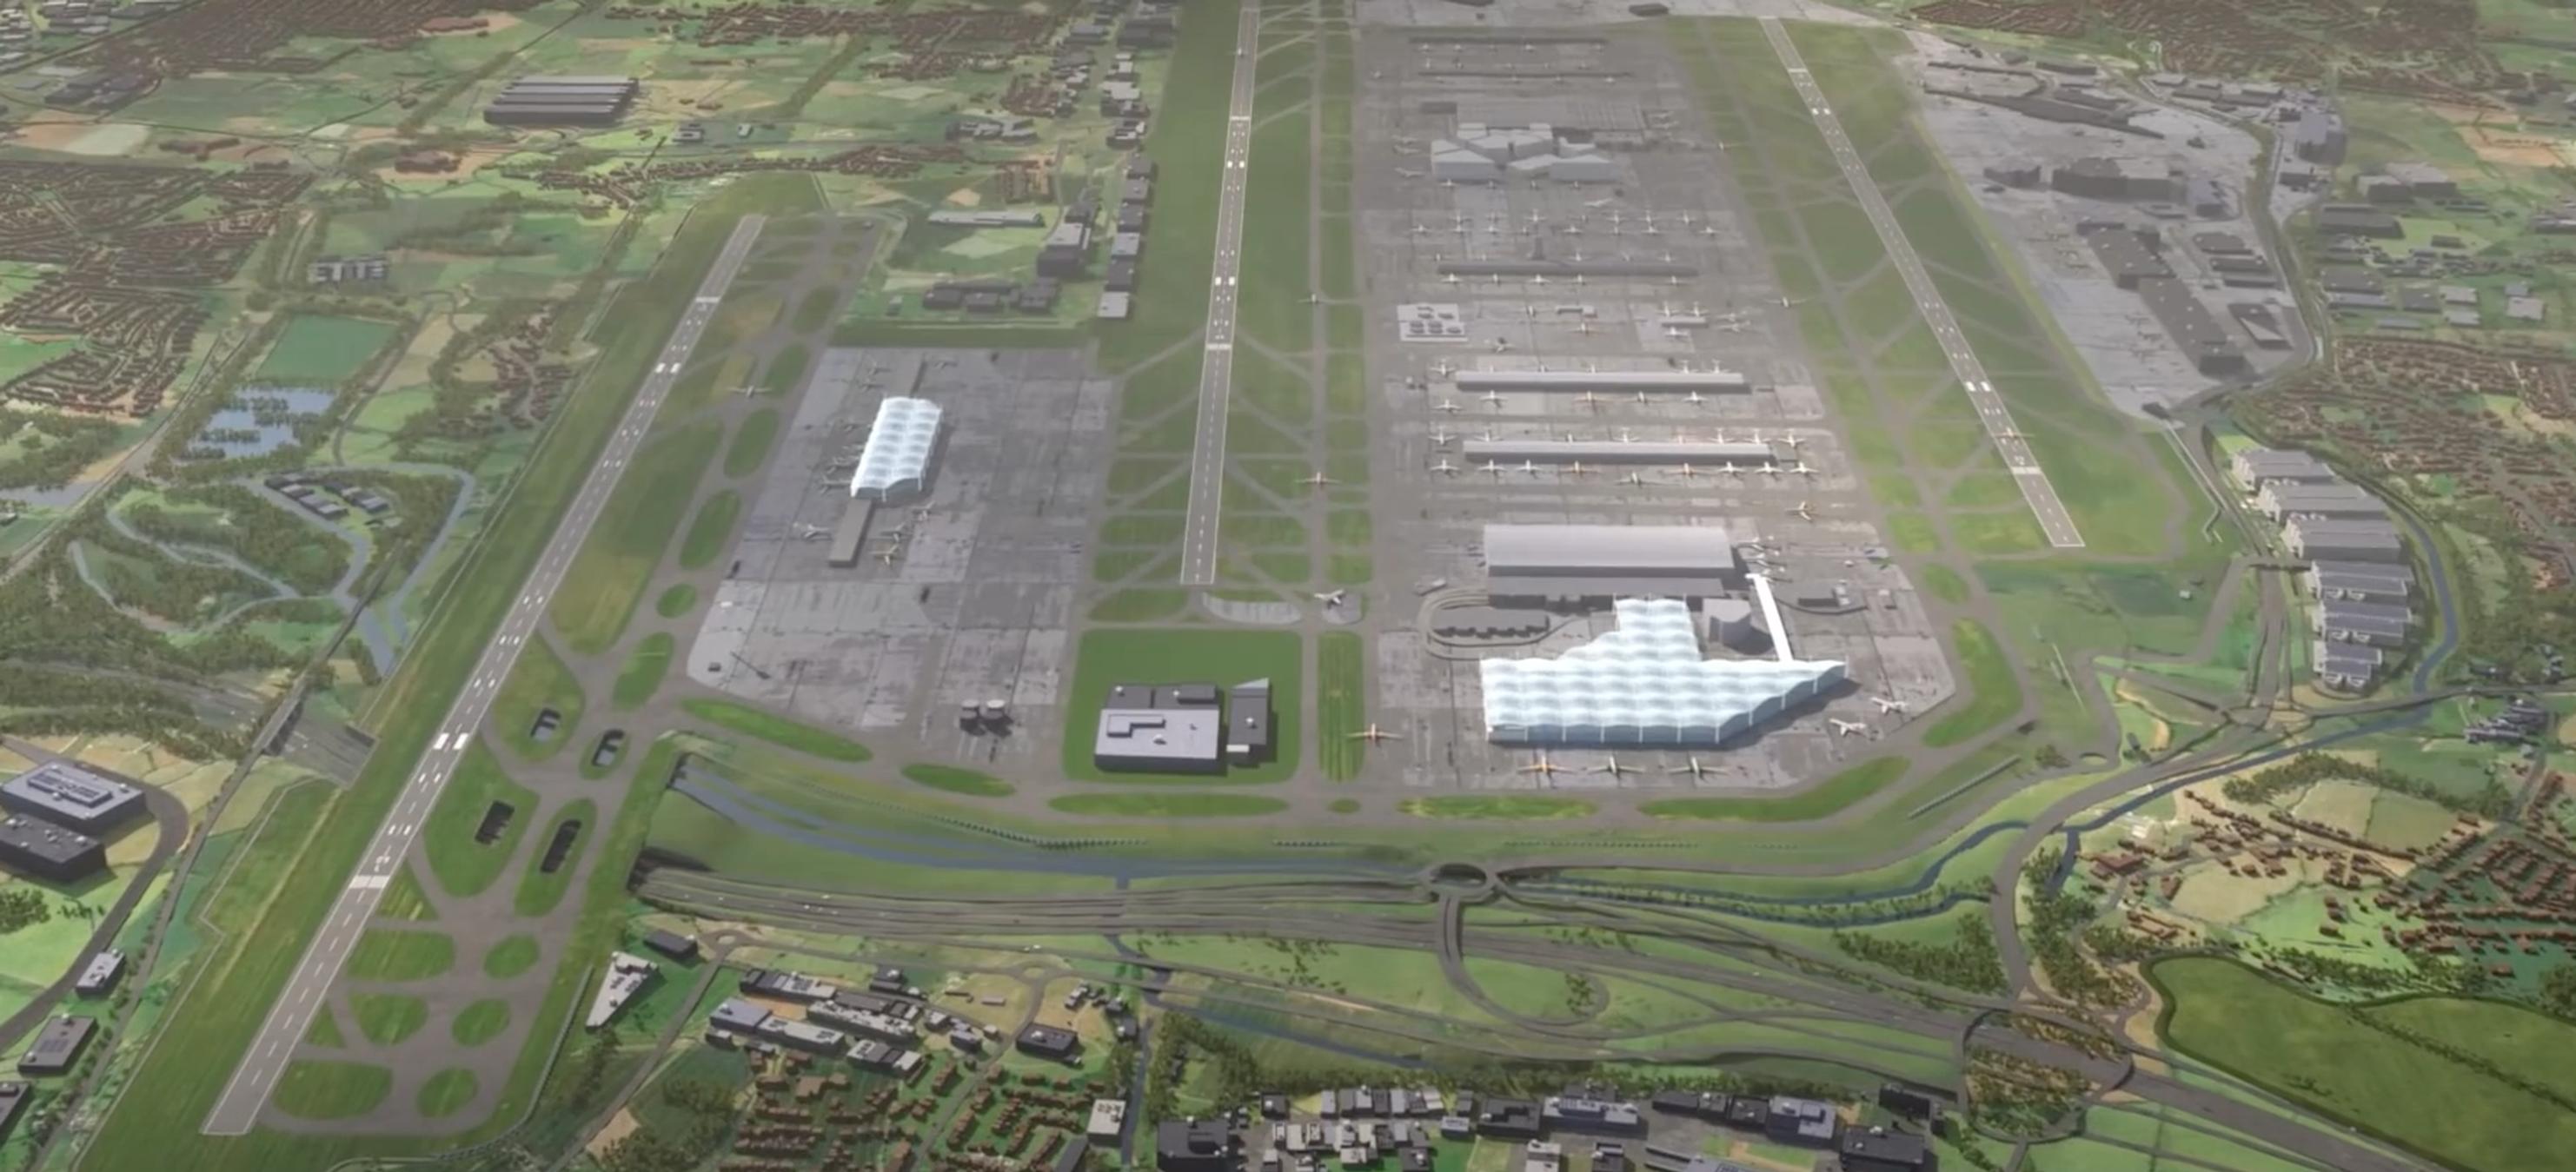 How Heathrow would look with the third runway (left). Environmentalists are now threatening a new legal challenge against the Government’s airports National Policy Statement, which backs Heathrow expansion